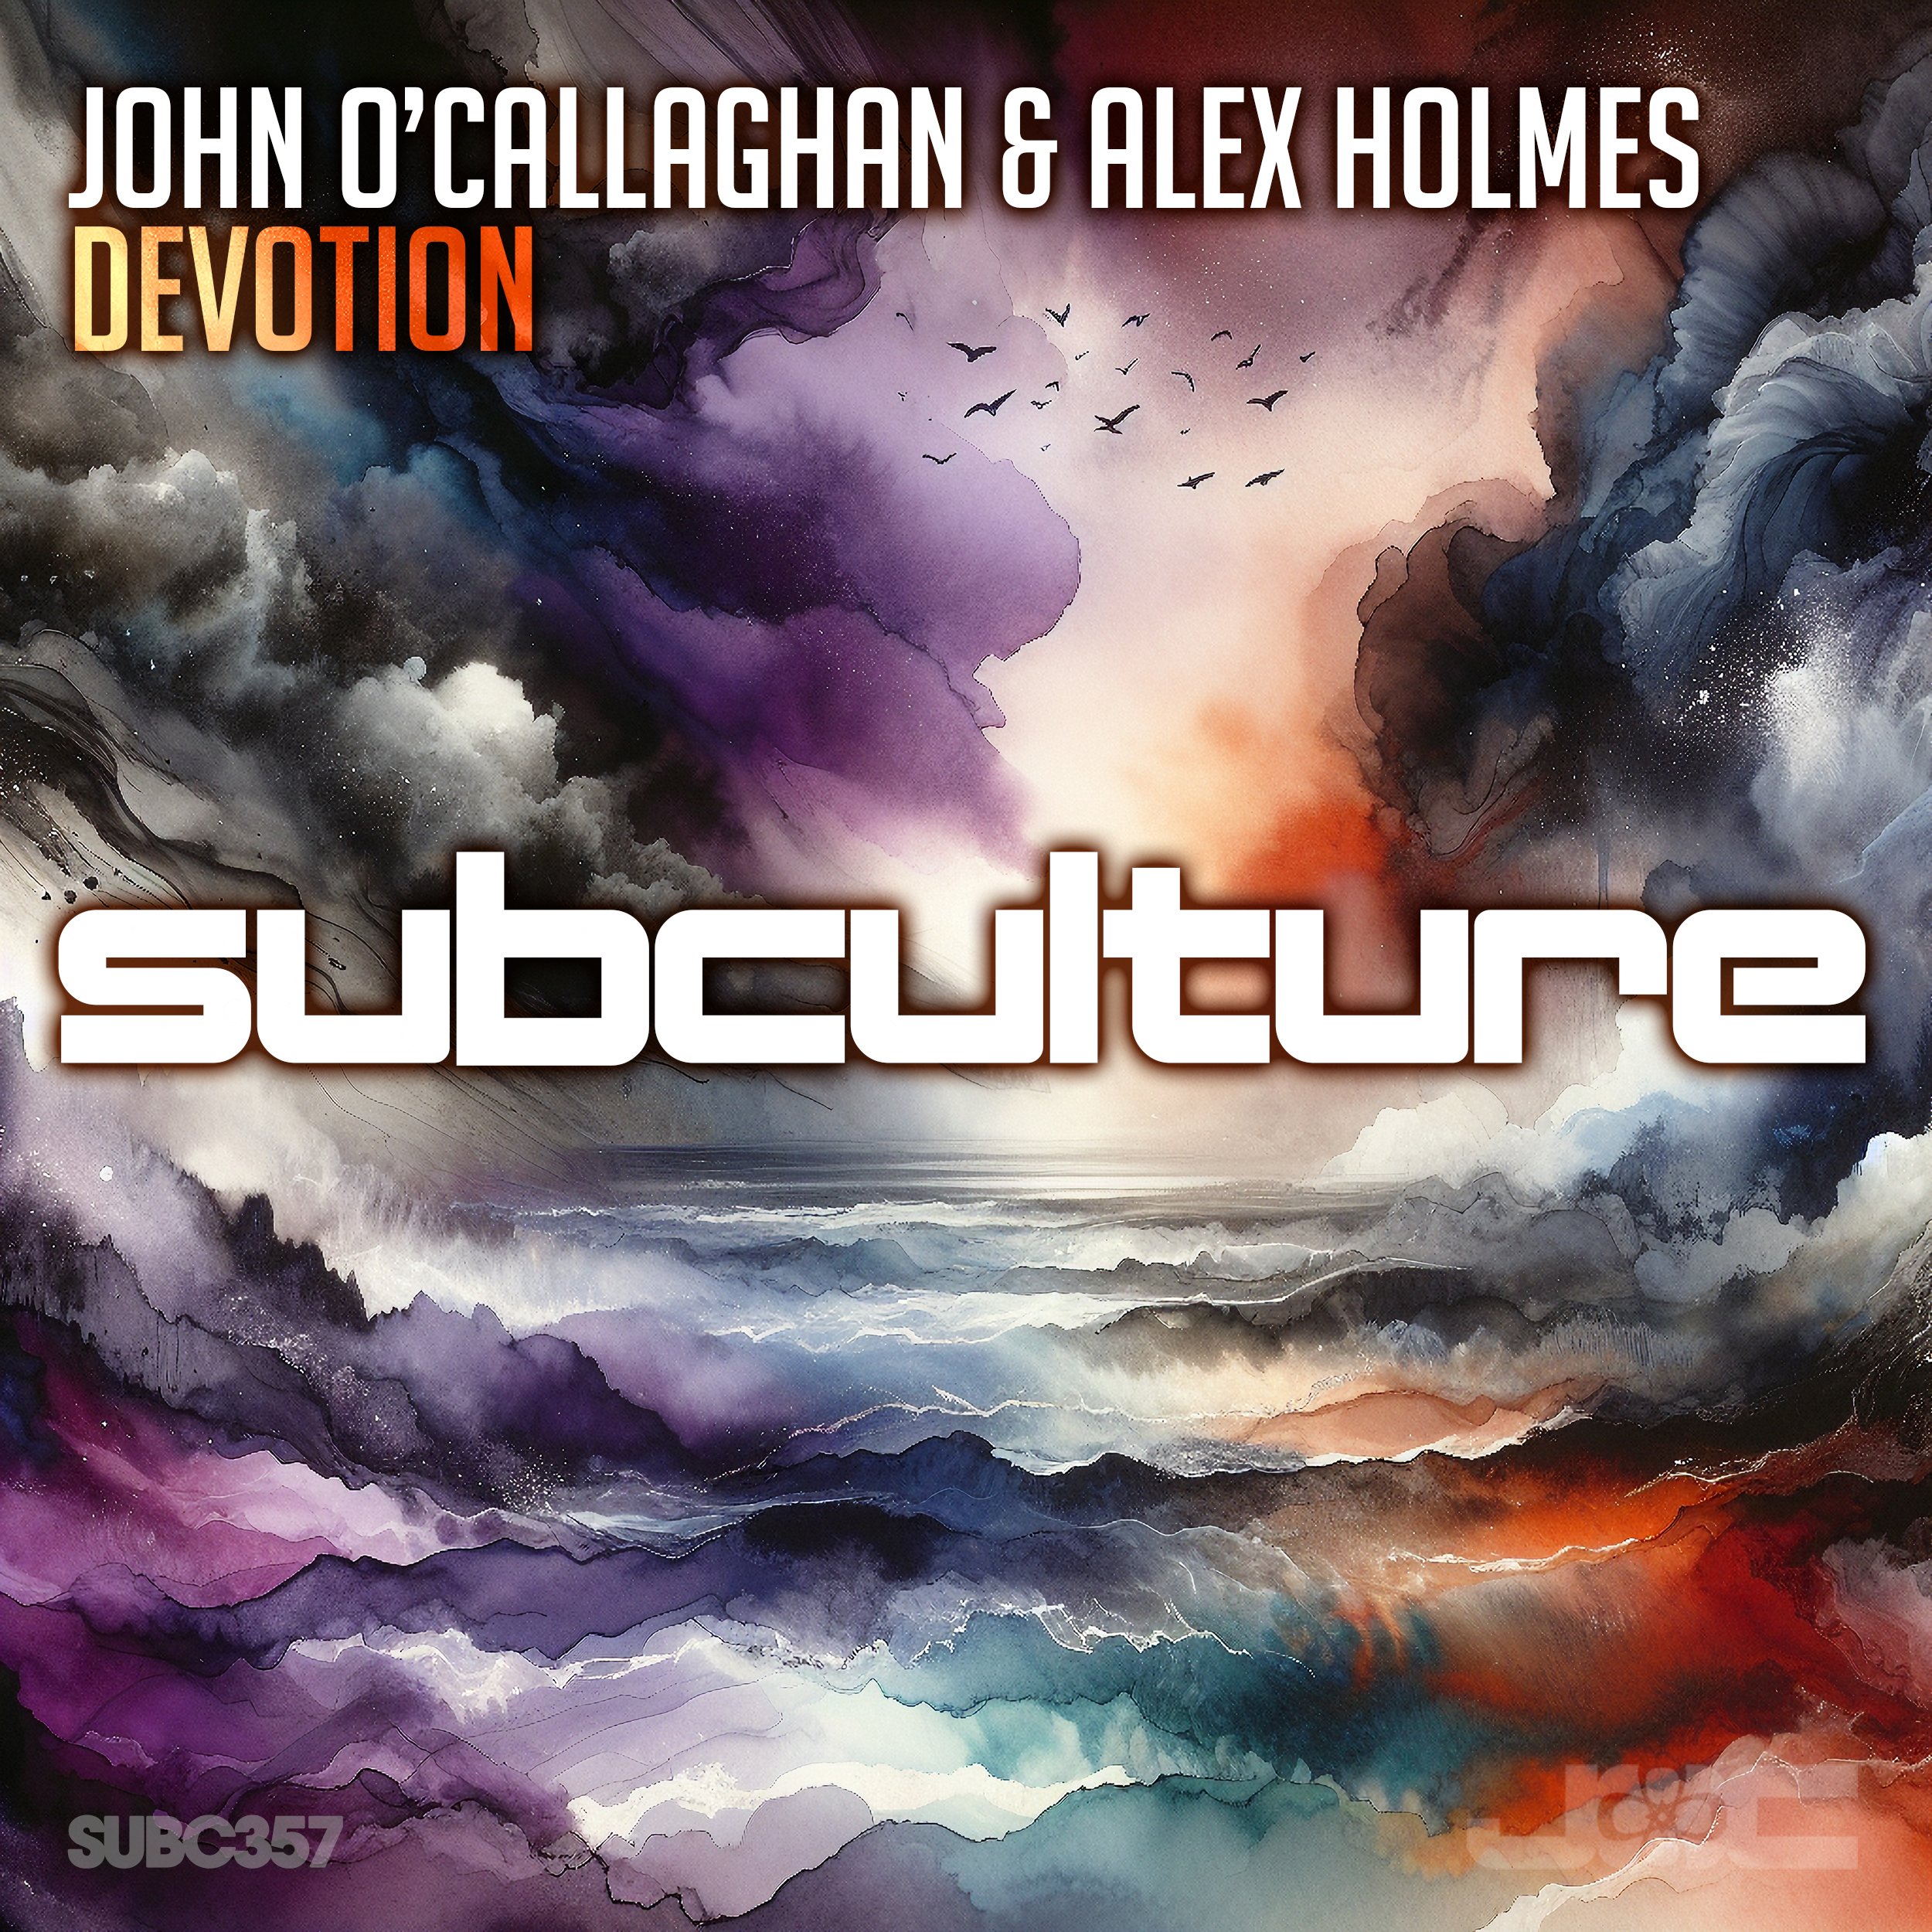 John O'Callaghan and Alex Holmes presents Devotion on Black Hole Recordings